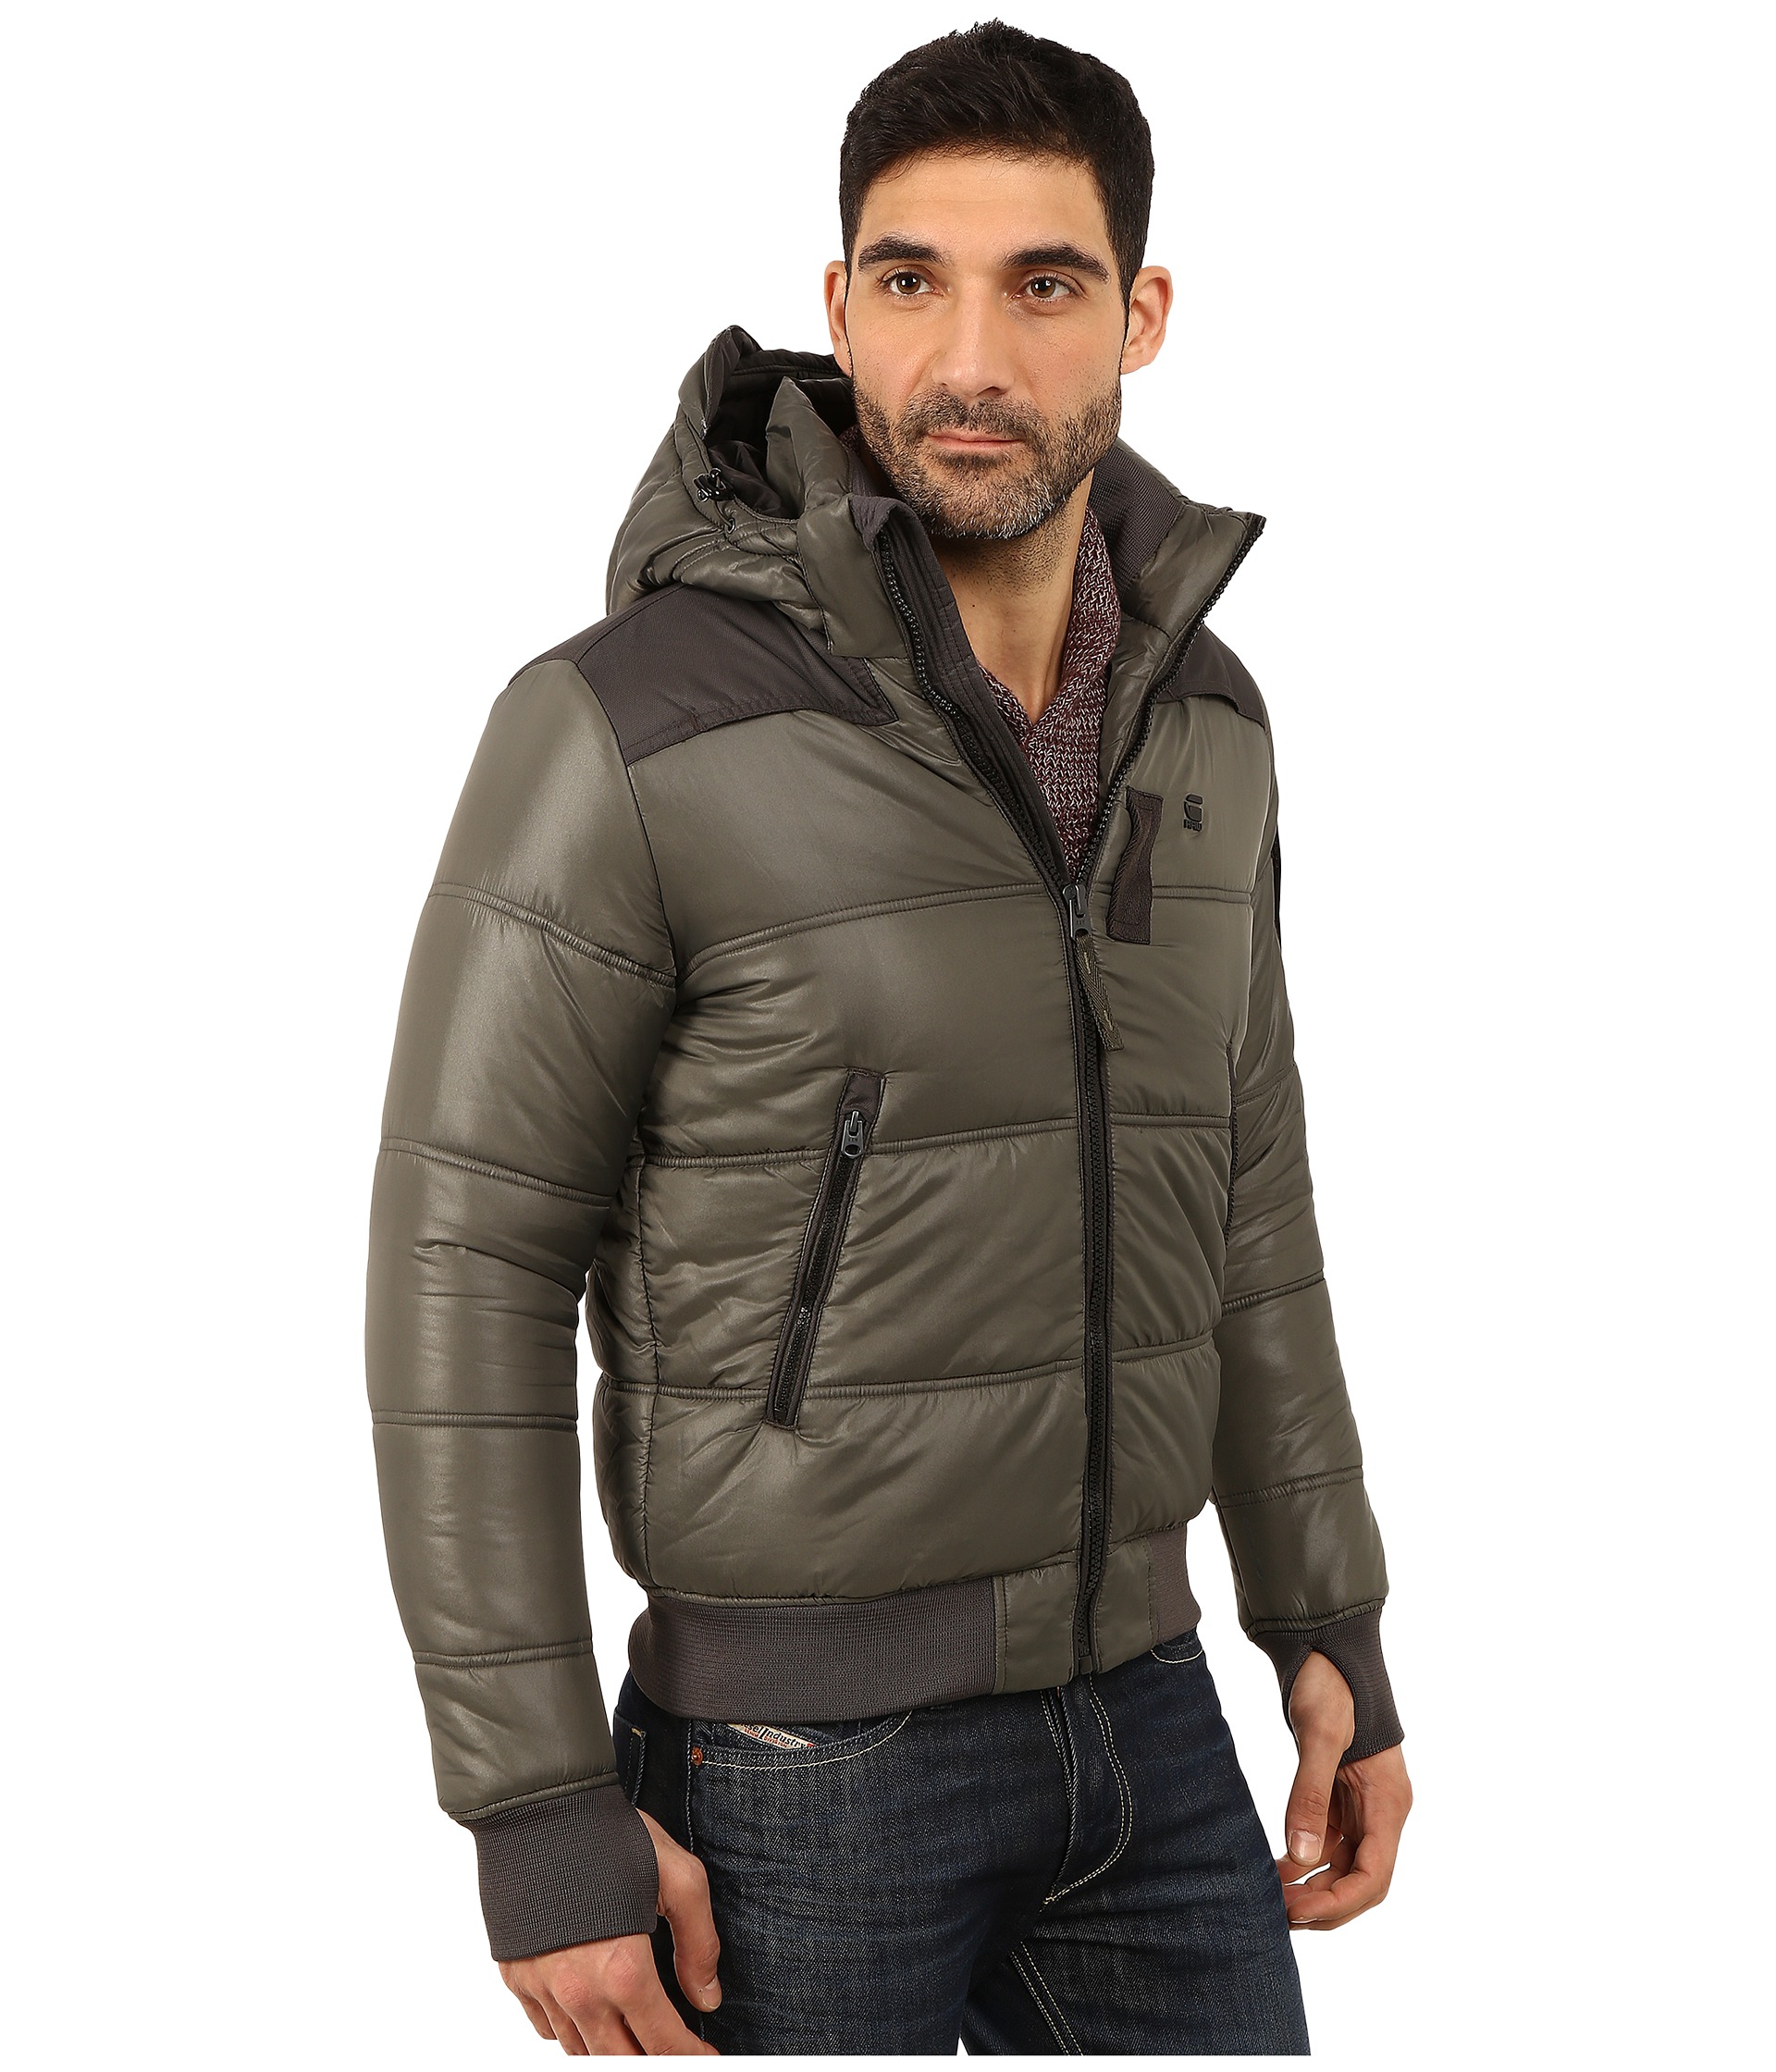 G-Star Whistler Hooded Bomber Jacket - Zappos.com Free Shipping BOTH Ways